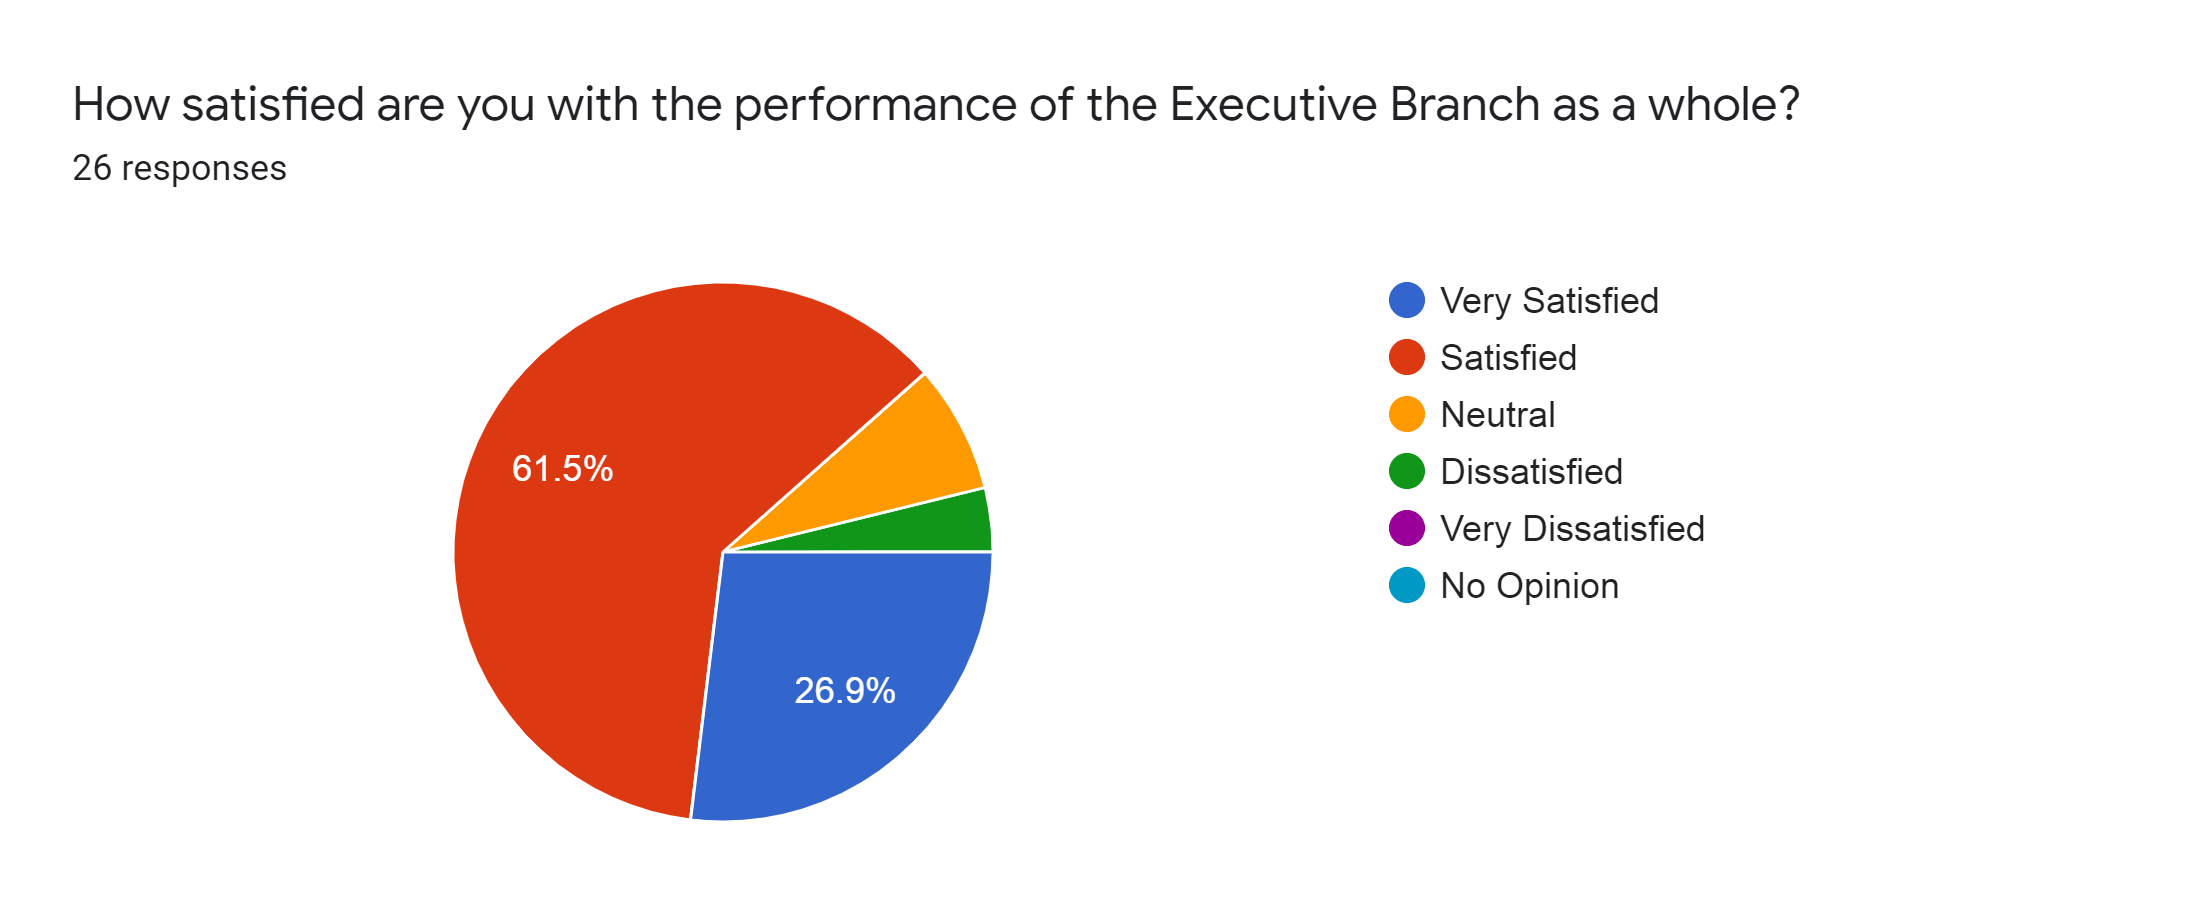 Forms response chart. Question title: How satisfied are you with the performance of the Executive Branch as a whole?. Number of responses: 26 responses.